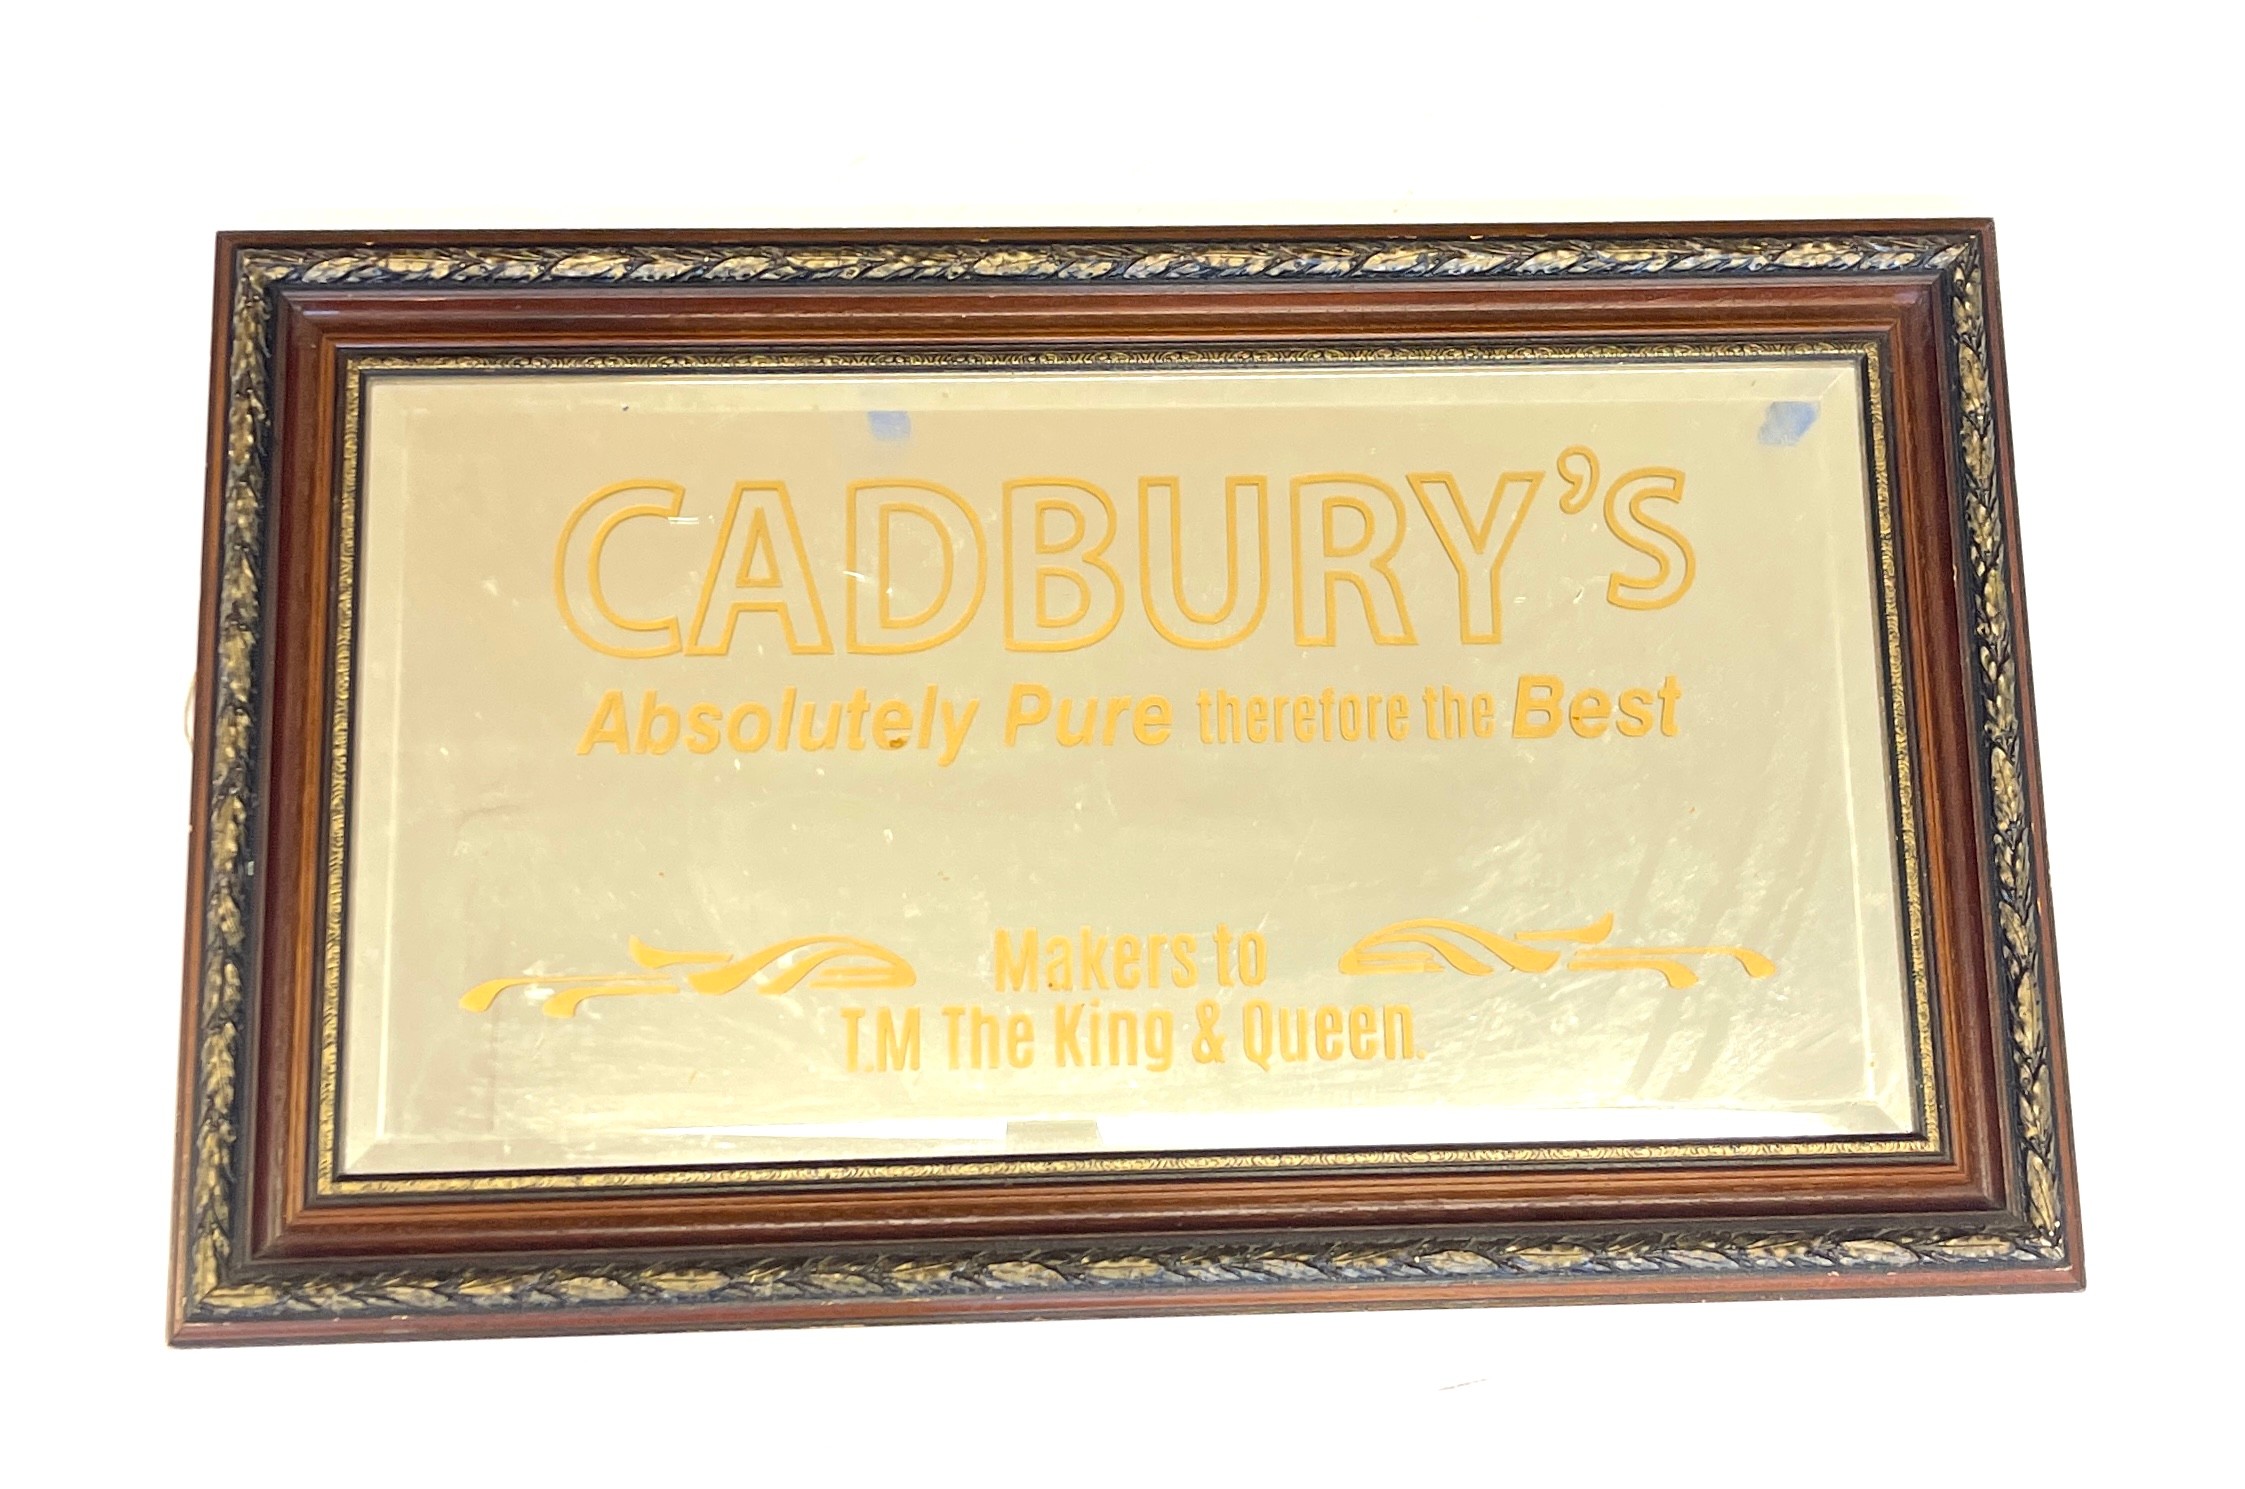 Framed advertising mirror, Cadburys absolutely pure therefore the best, Makers to the TM The King